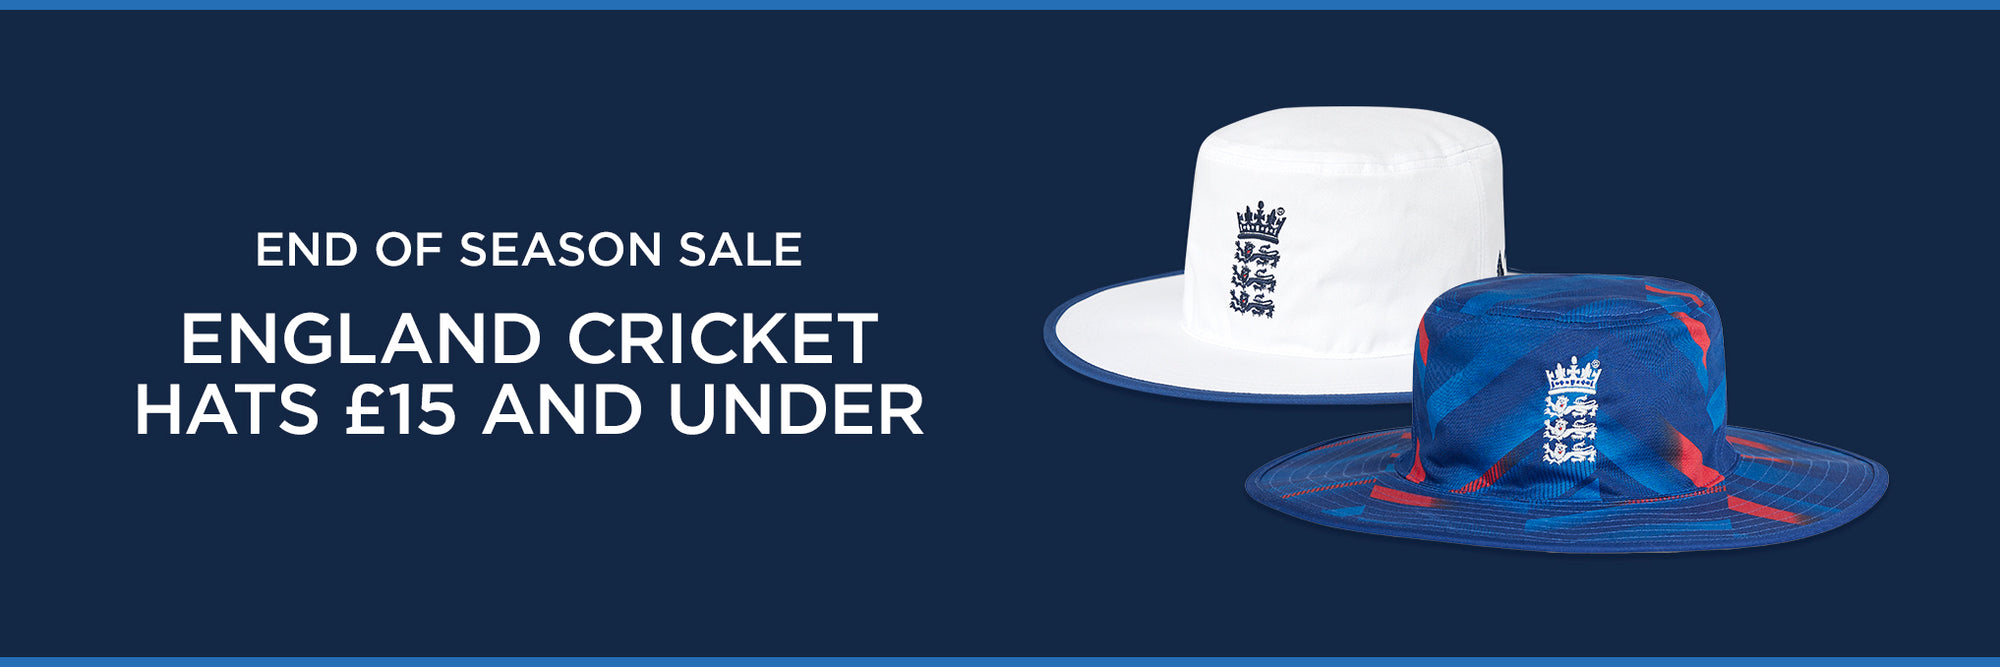 End of Season Sale - Hats £15 and under